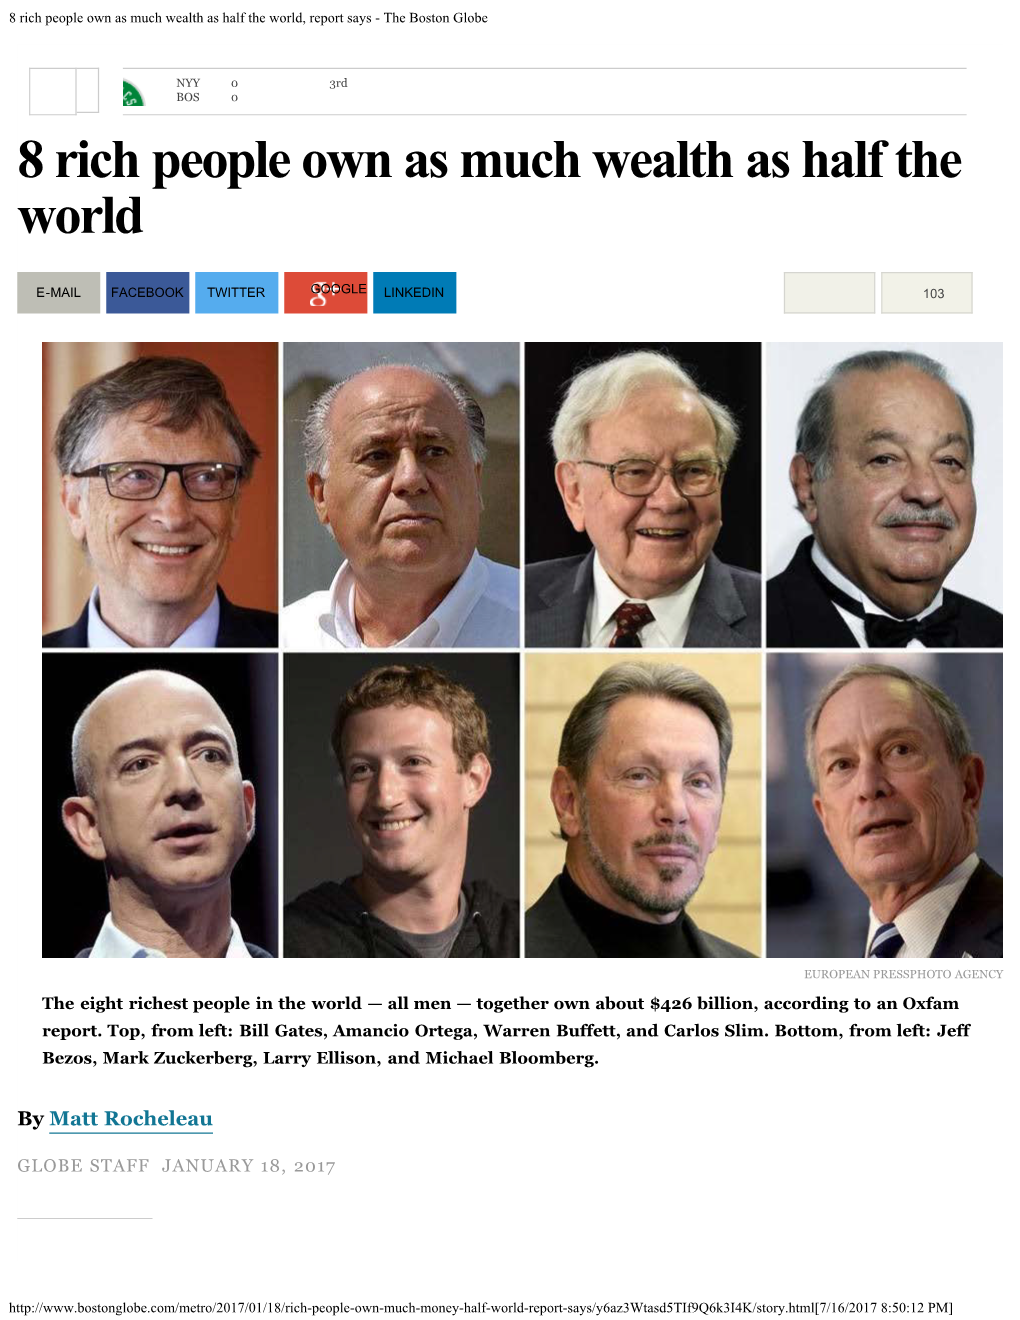 8 Rich People Own As Much Wealth As Half the World, Report Says - the Boston Globe